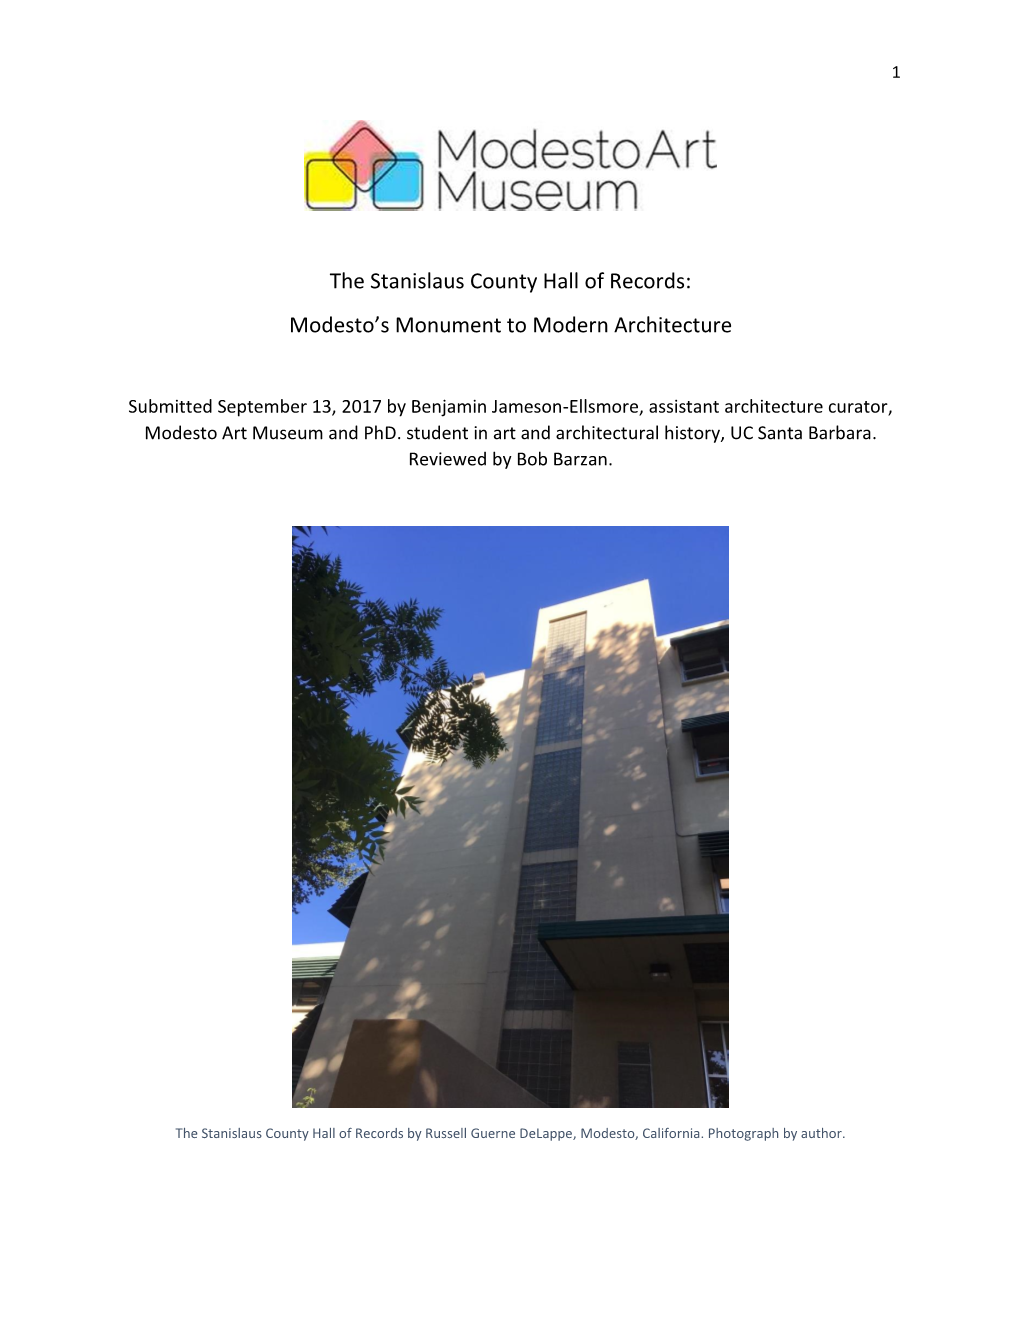 The Stanislaus County Hall of Records: Modesto’S Monument to Modern Architecture